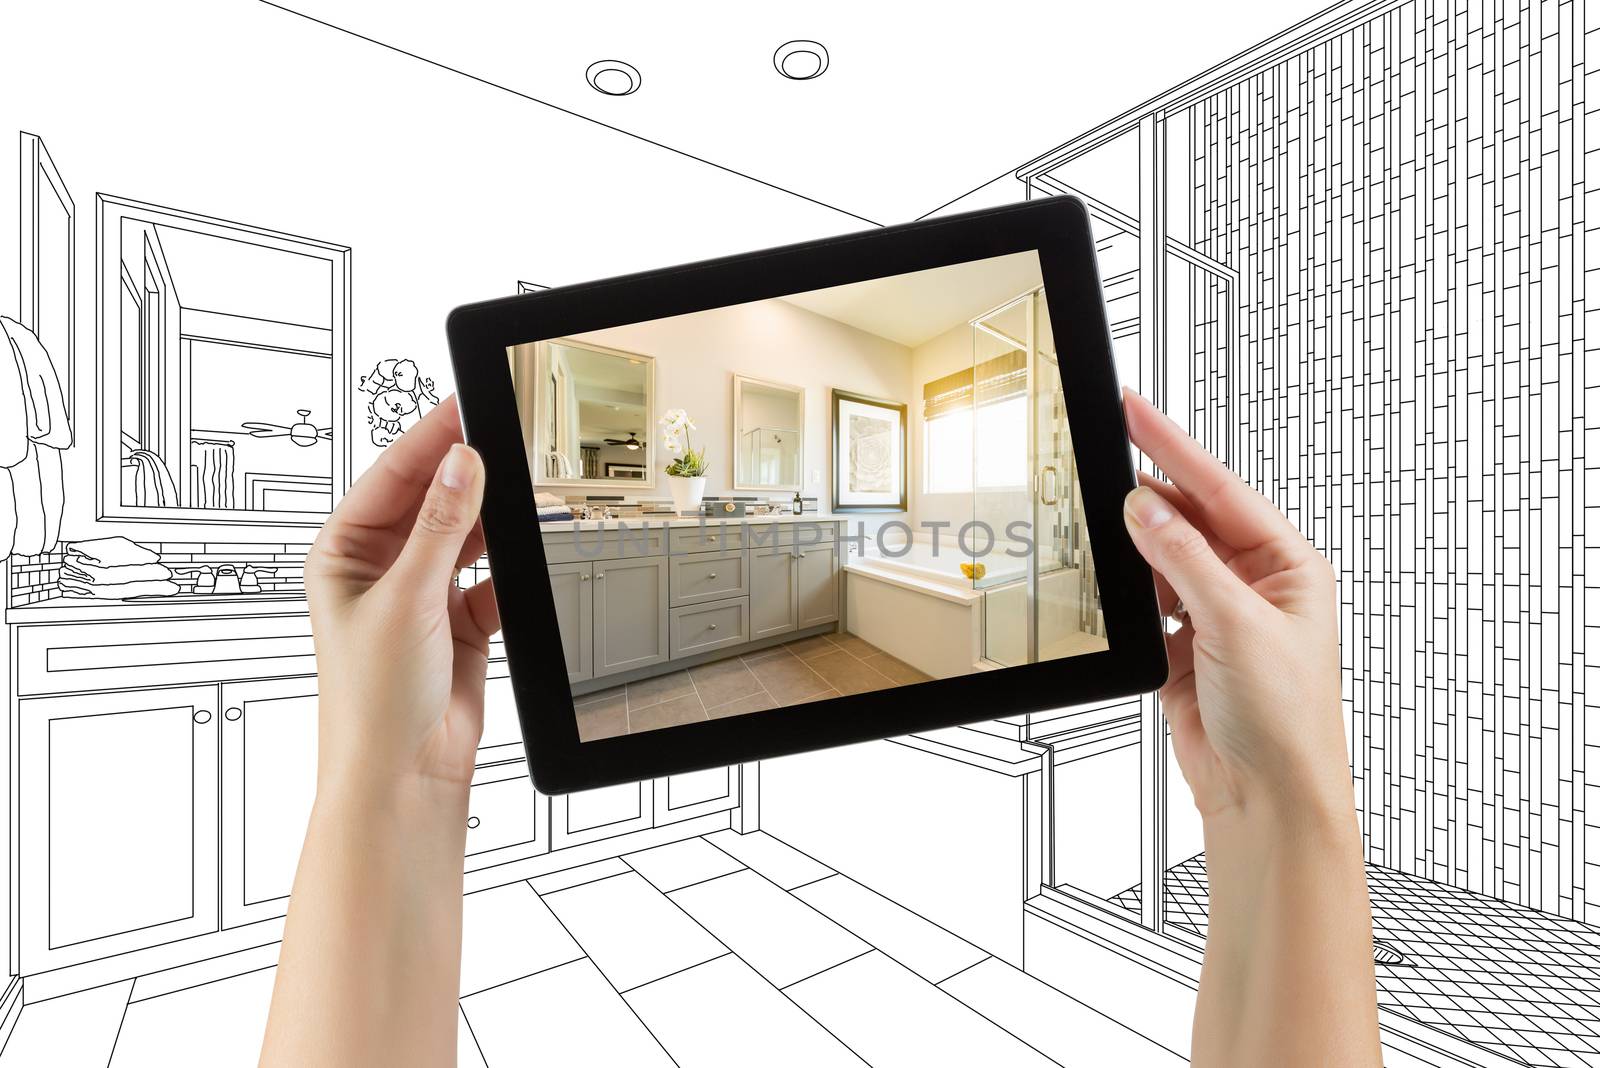 Hands Holding Computer Tablet with Master Bathroom Photo on Screen and Drawing Behind. by Feverpitched